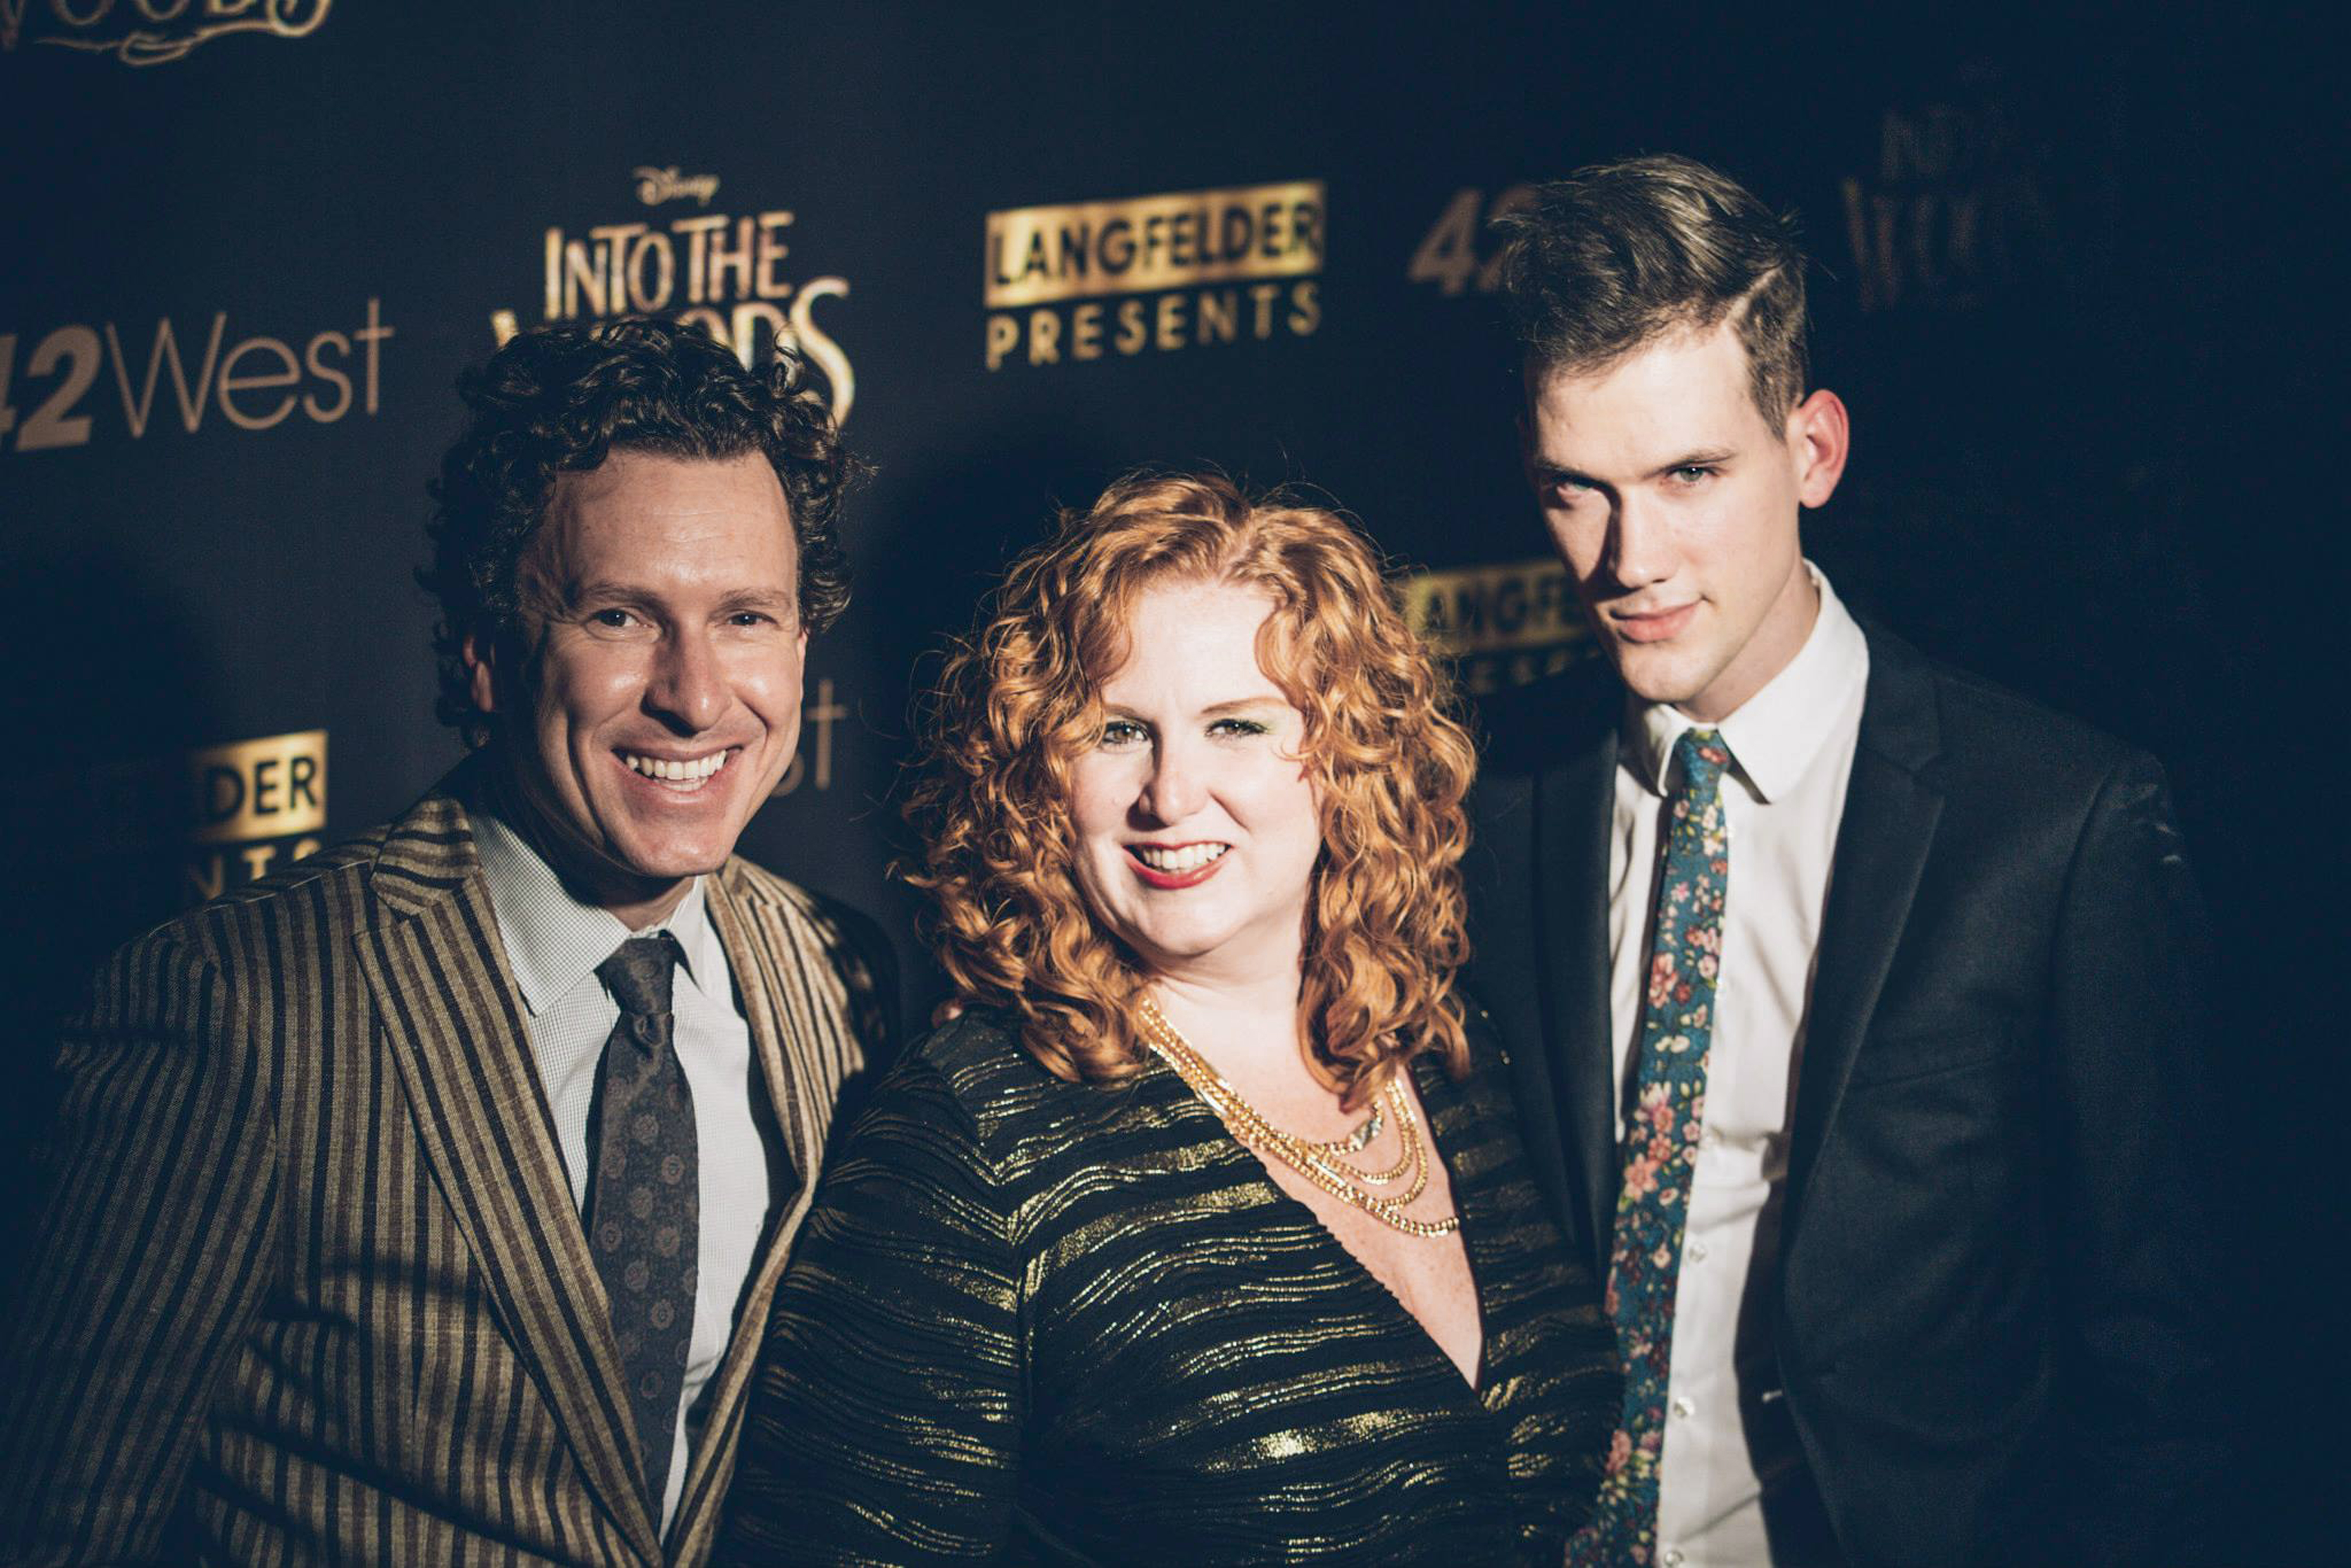 Andrew Nielson with producer Jacob Langfelder and Sirius XM Broadway personality Julie James at Disney's INTO THE WOODS event.